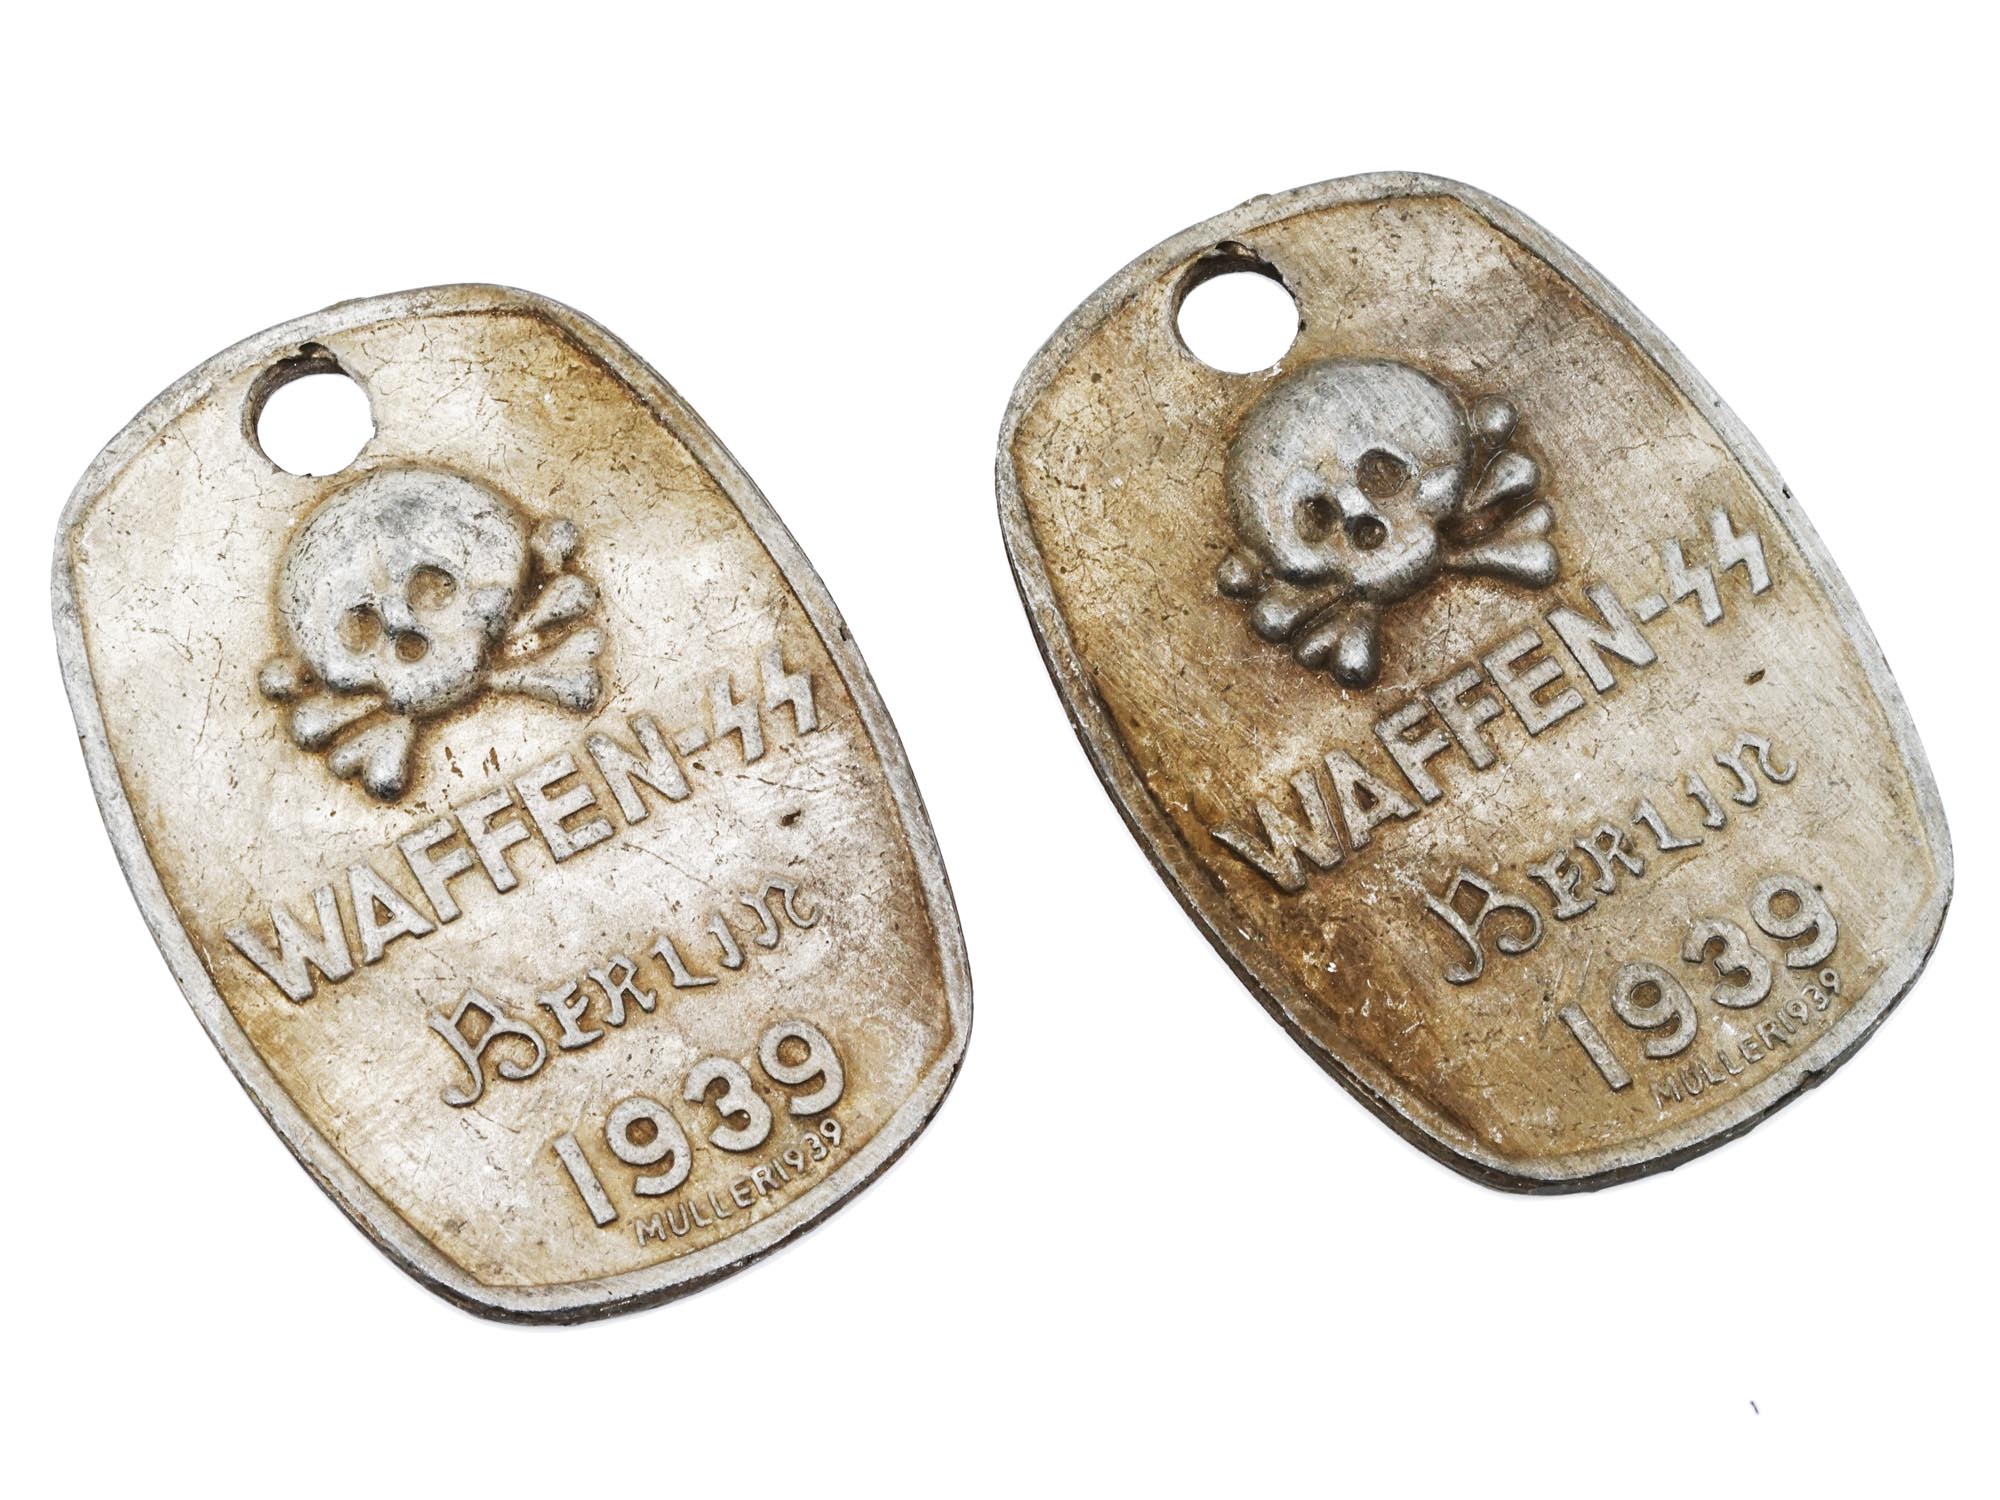 WWII NAZI GERMAN WAFFEN SS AND POLICE ID TAGS PIC-2